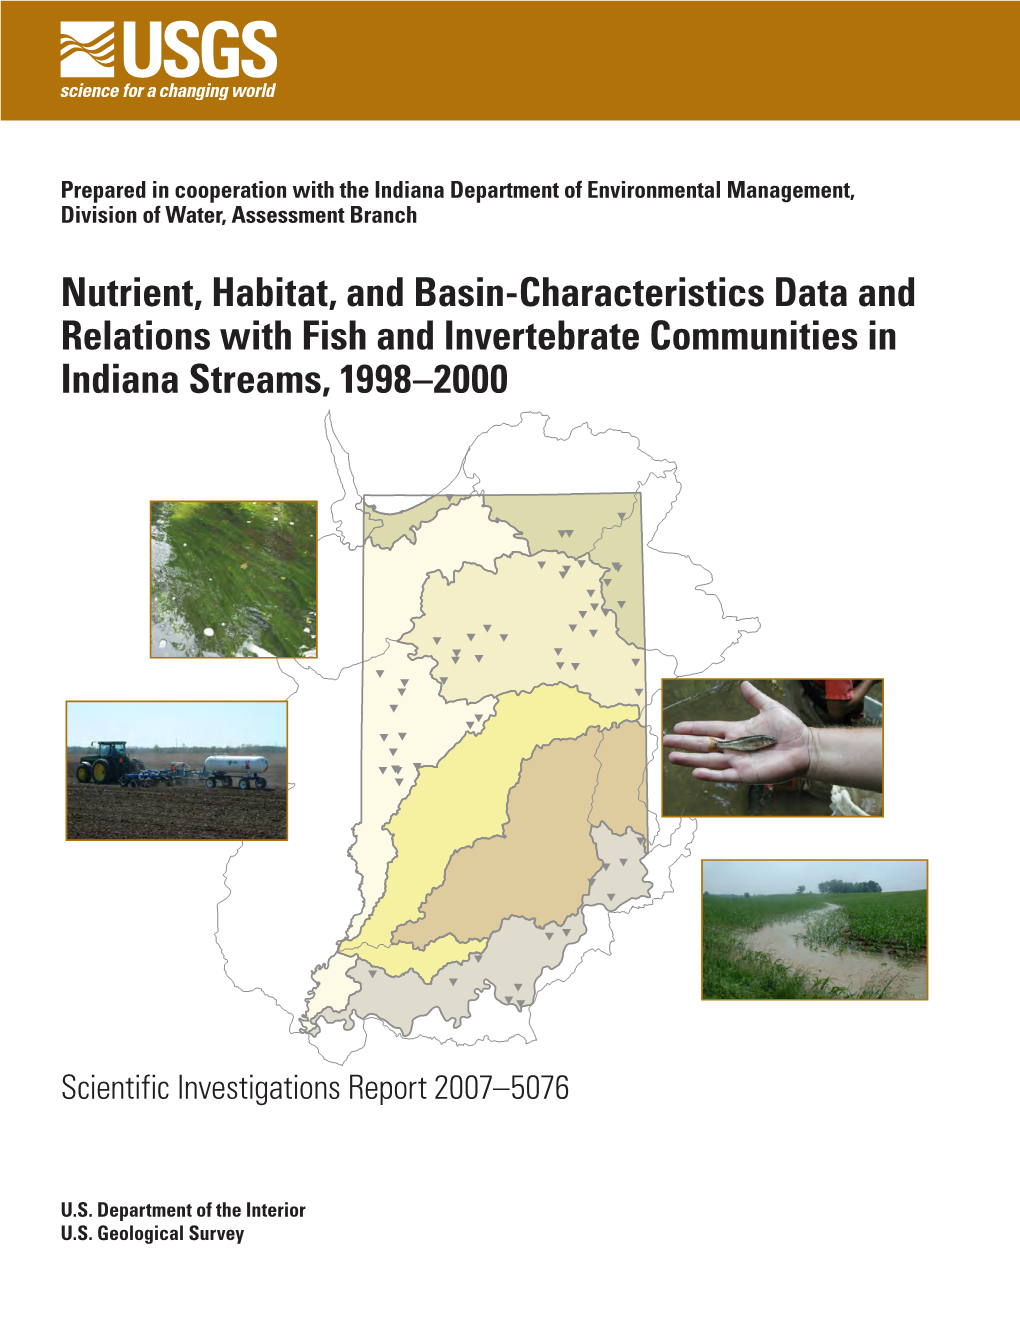 Nutrient, Habitat, and Basin-Characteristics Data and Relations with Fish and Invertebrate Communities in Indiana Streams, 1998–2000